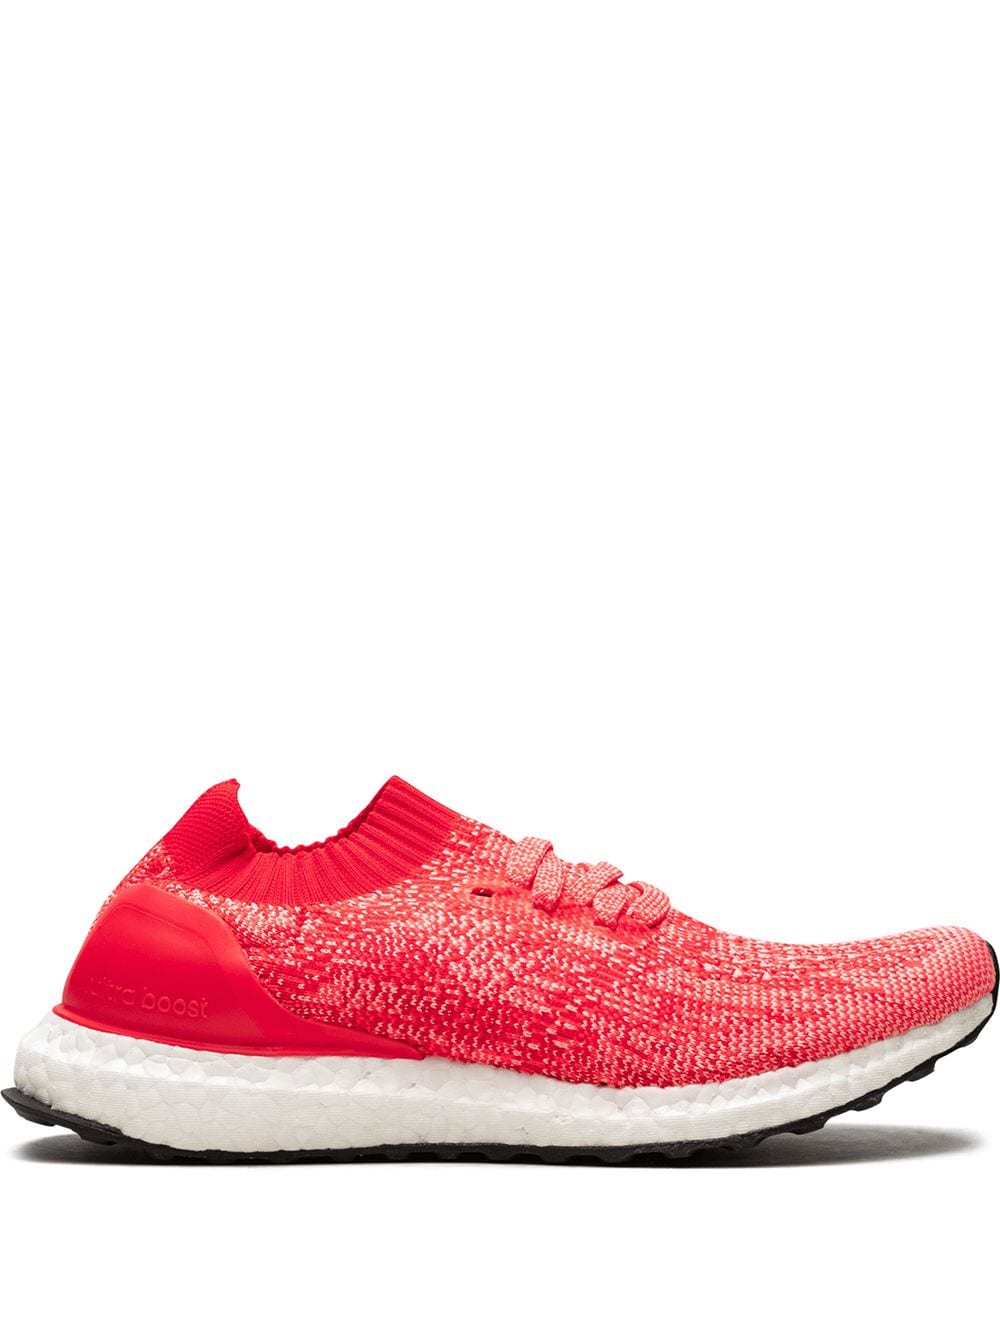 adidas Ultraboost Uncaged J sneakers - Red von adidas